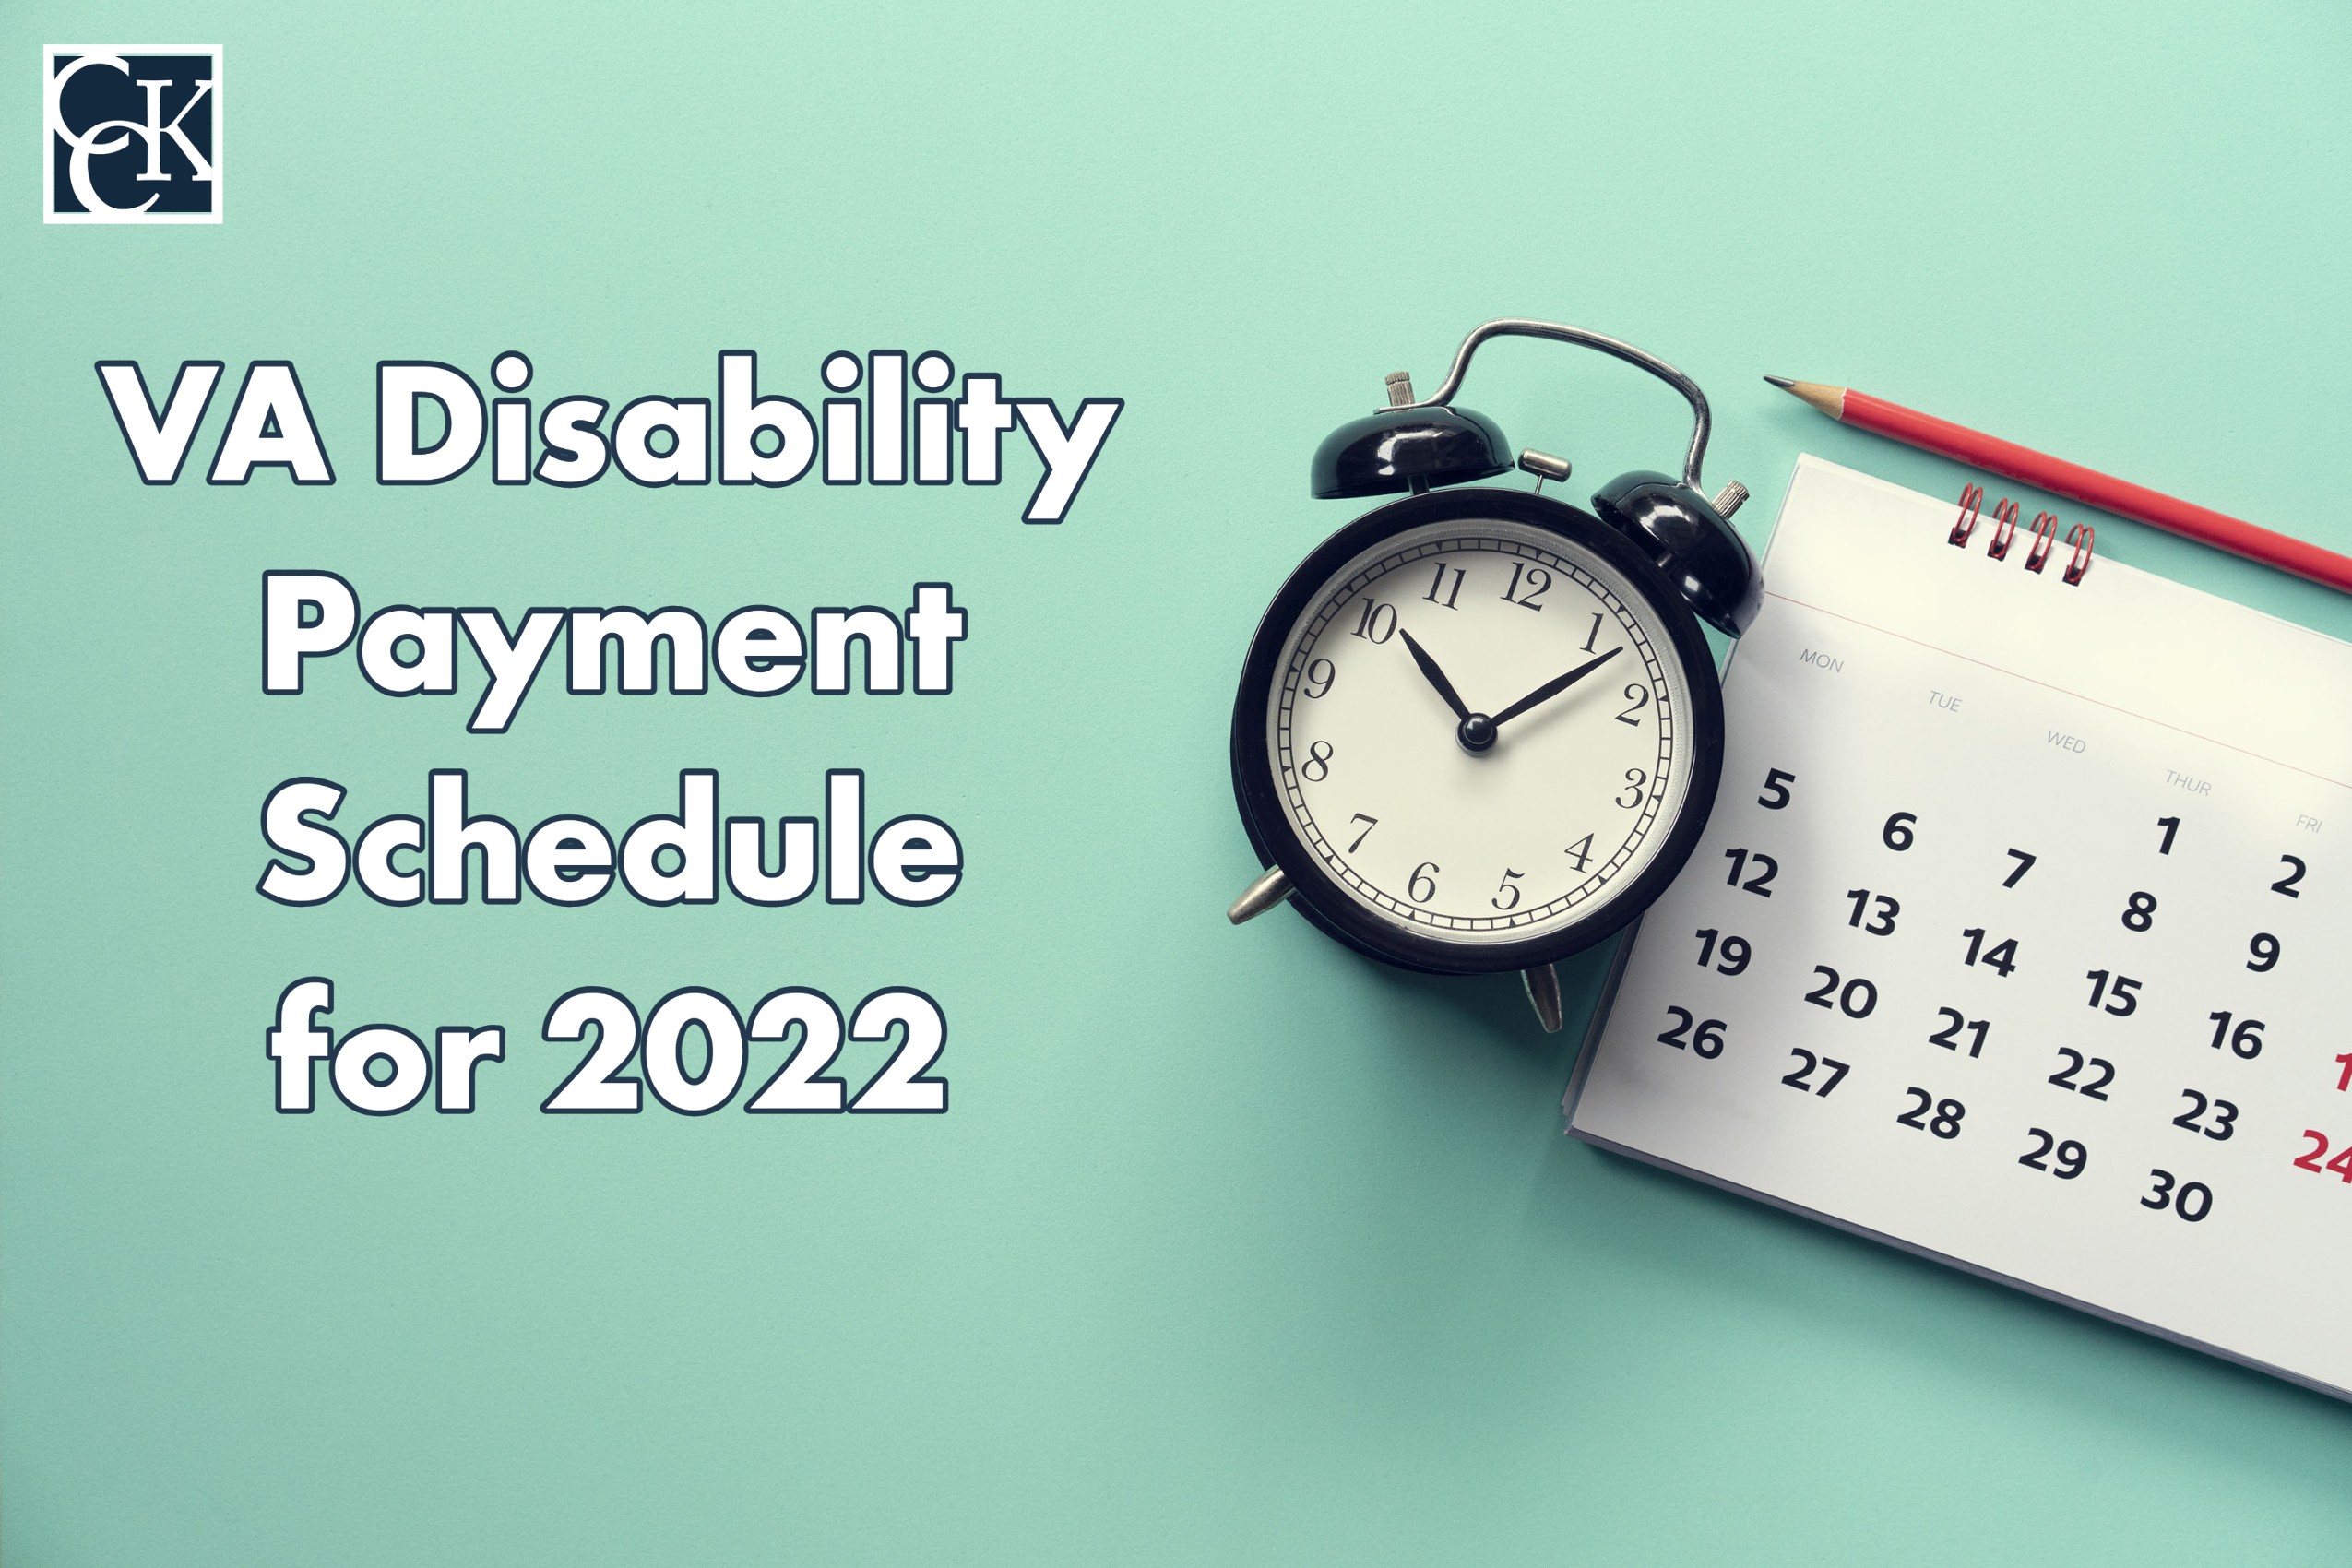 VA Disability Payment Schedule for 2022 CCK Law